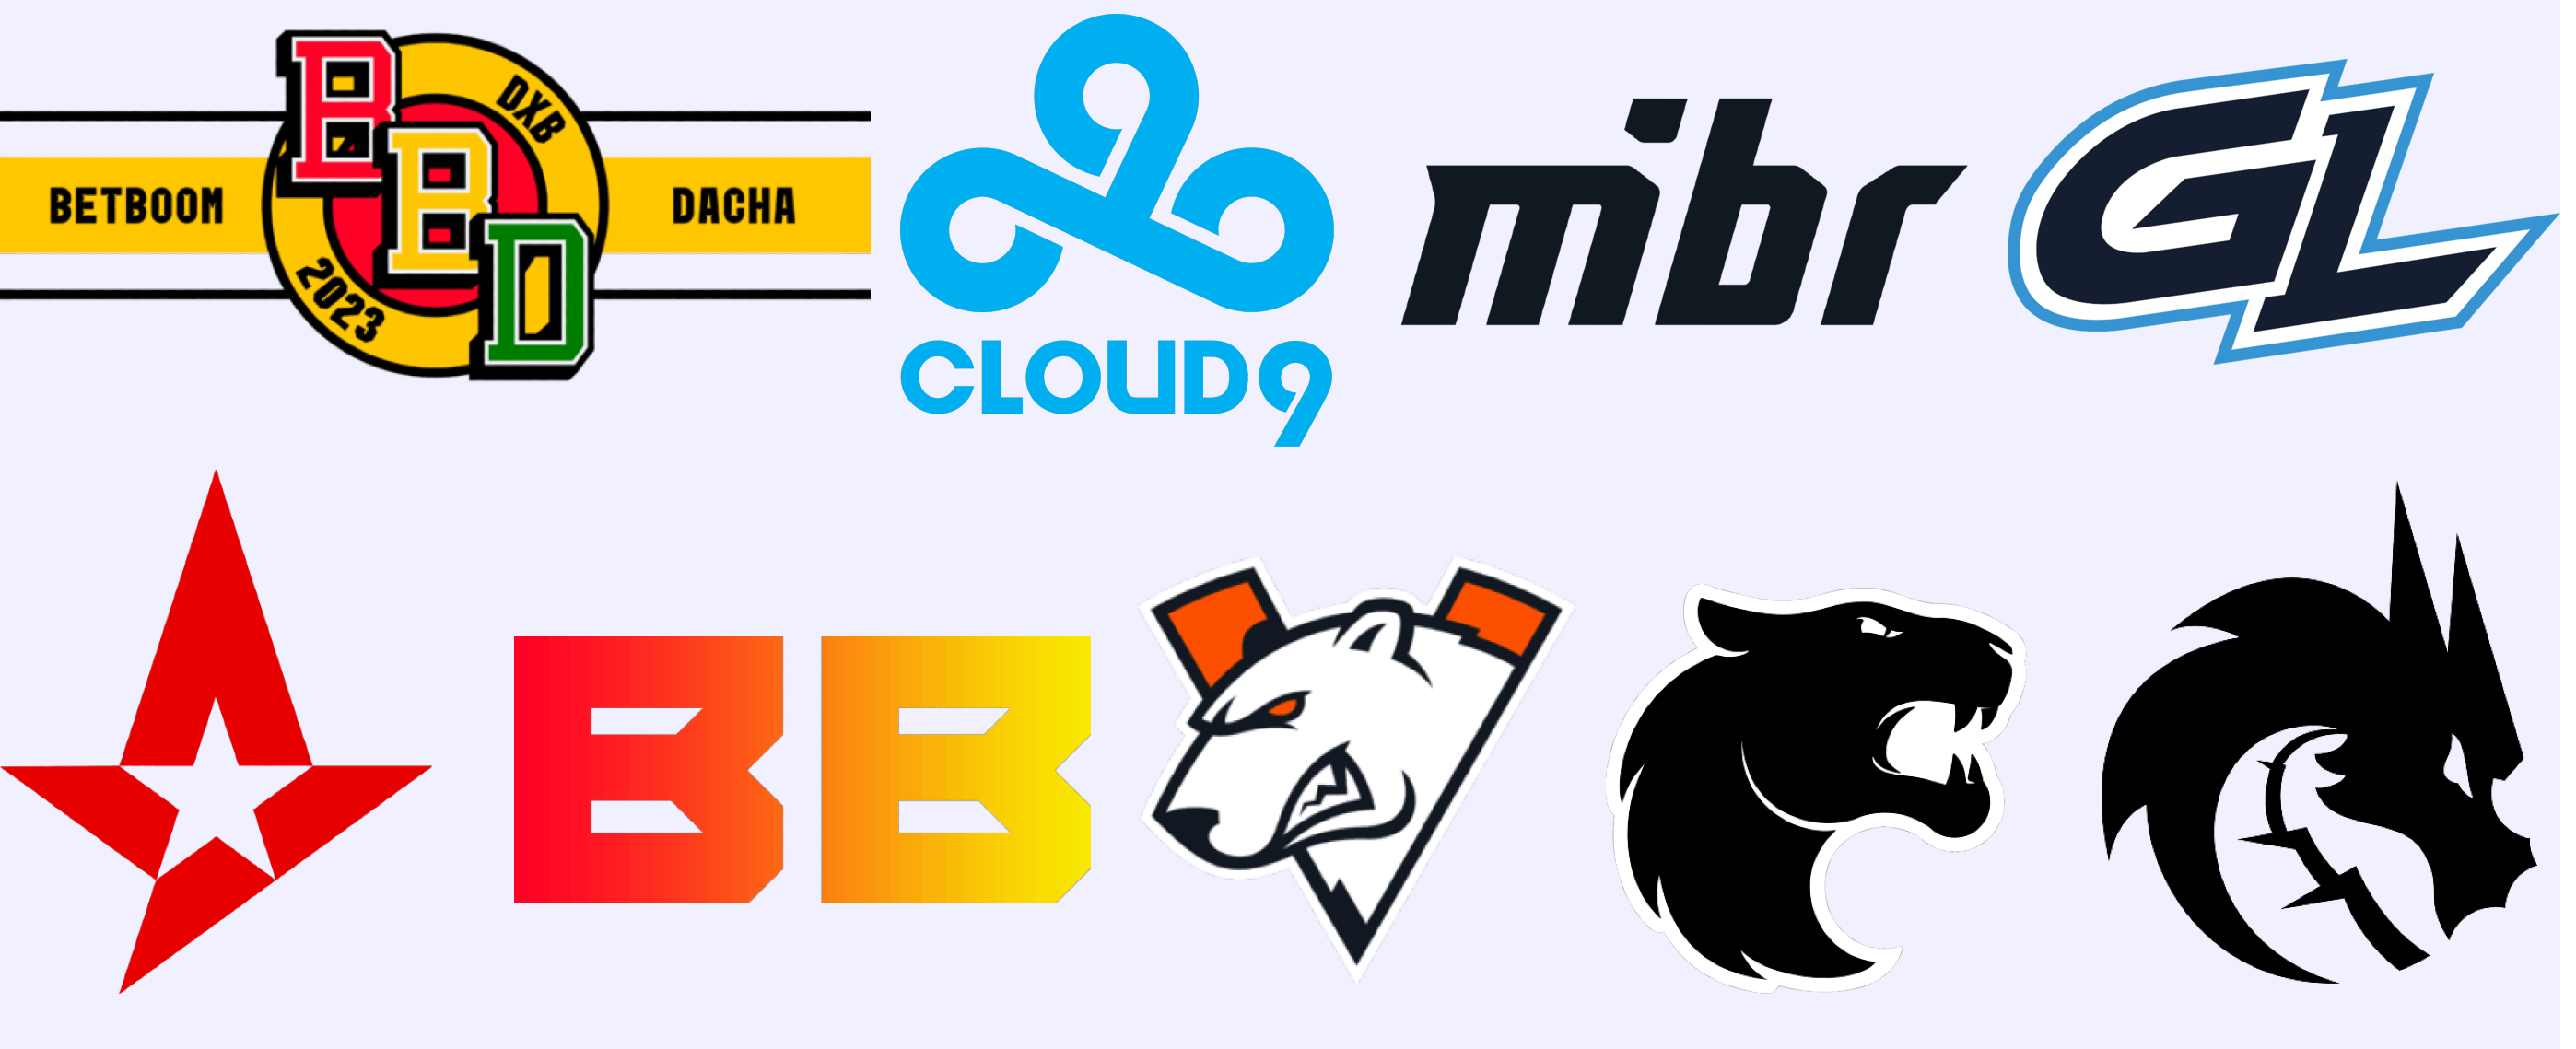 Eight teams are competing in BetBoom Dacha 2023, including Cloud9 and Astralis. 